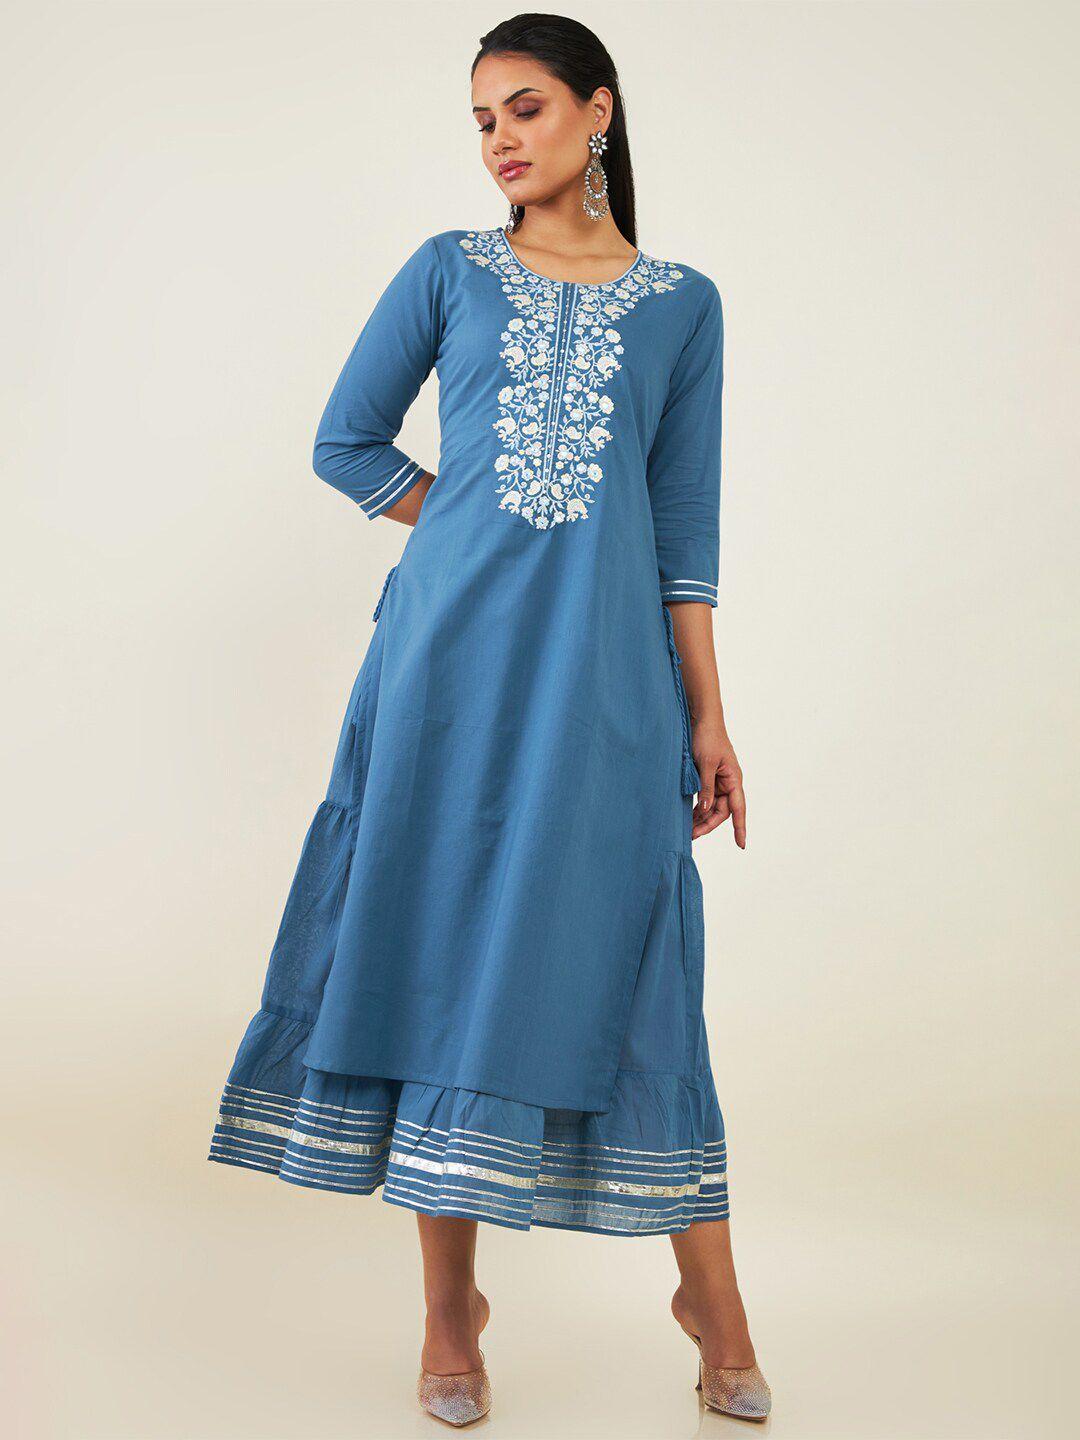 soch-round-neck-floral-embroidered-fit-and-flare-cotton-ethnic-dress